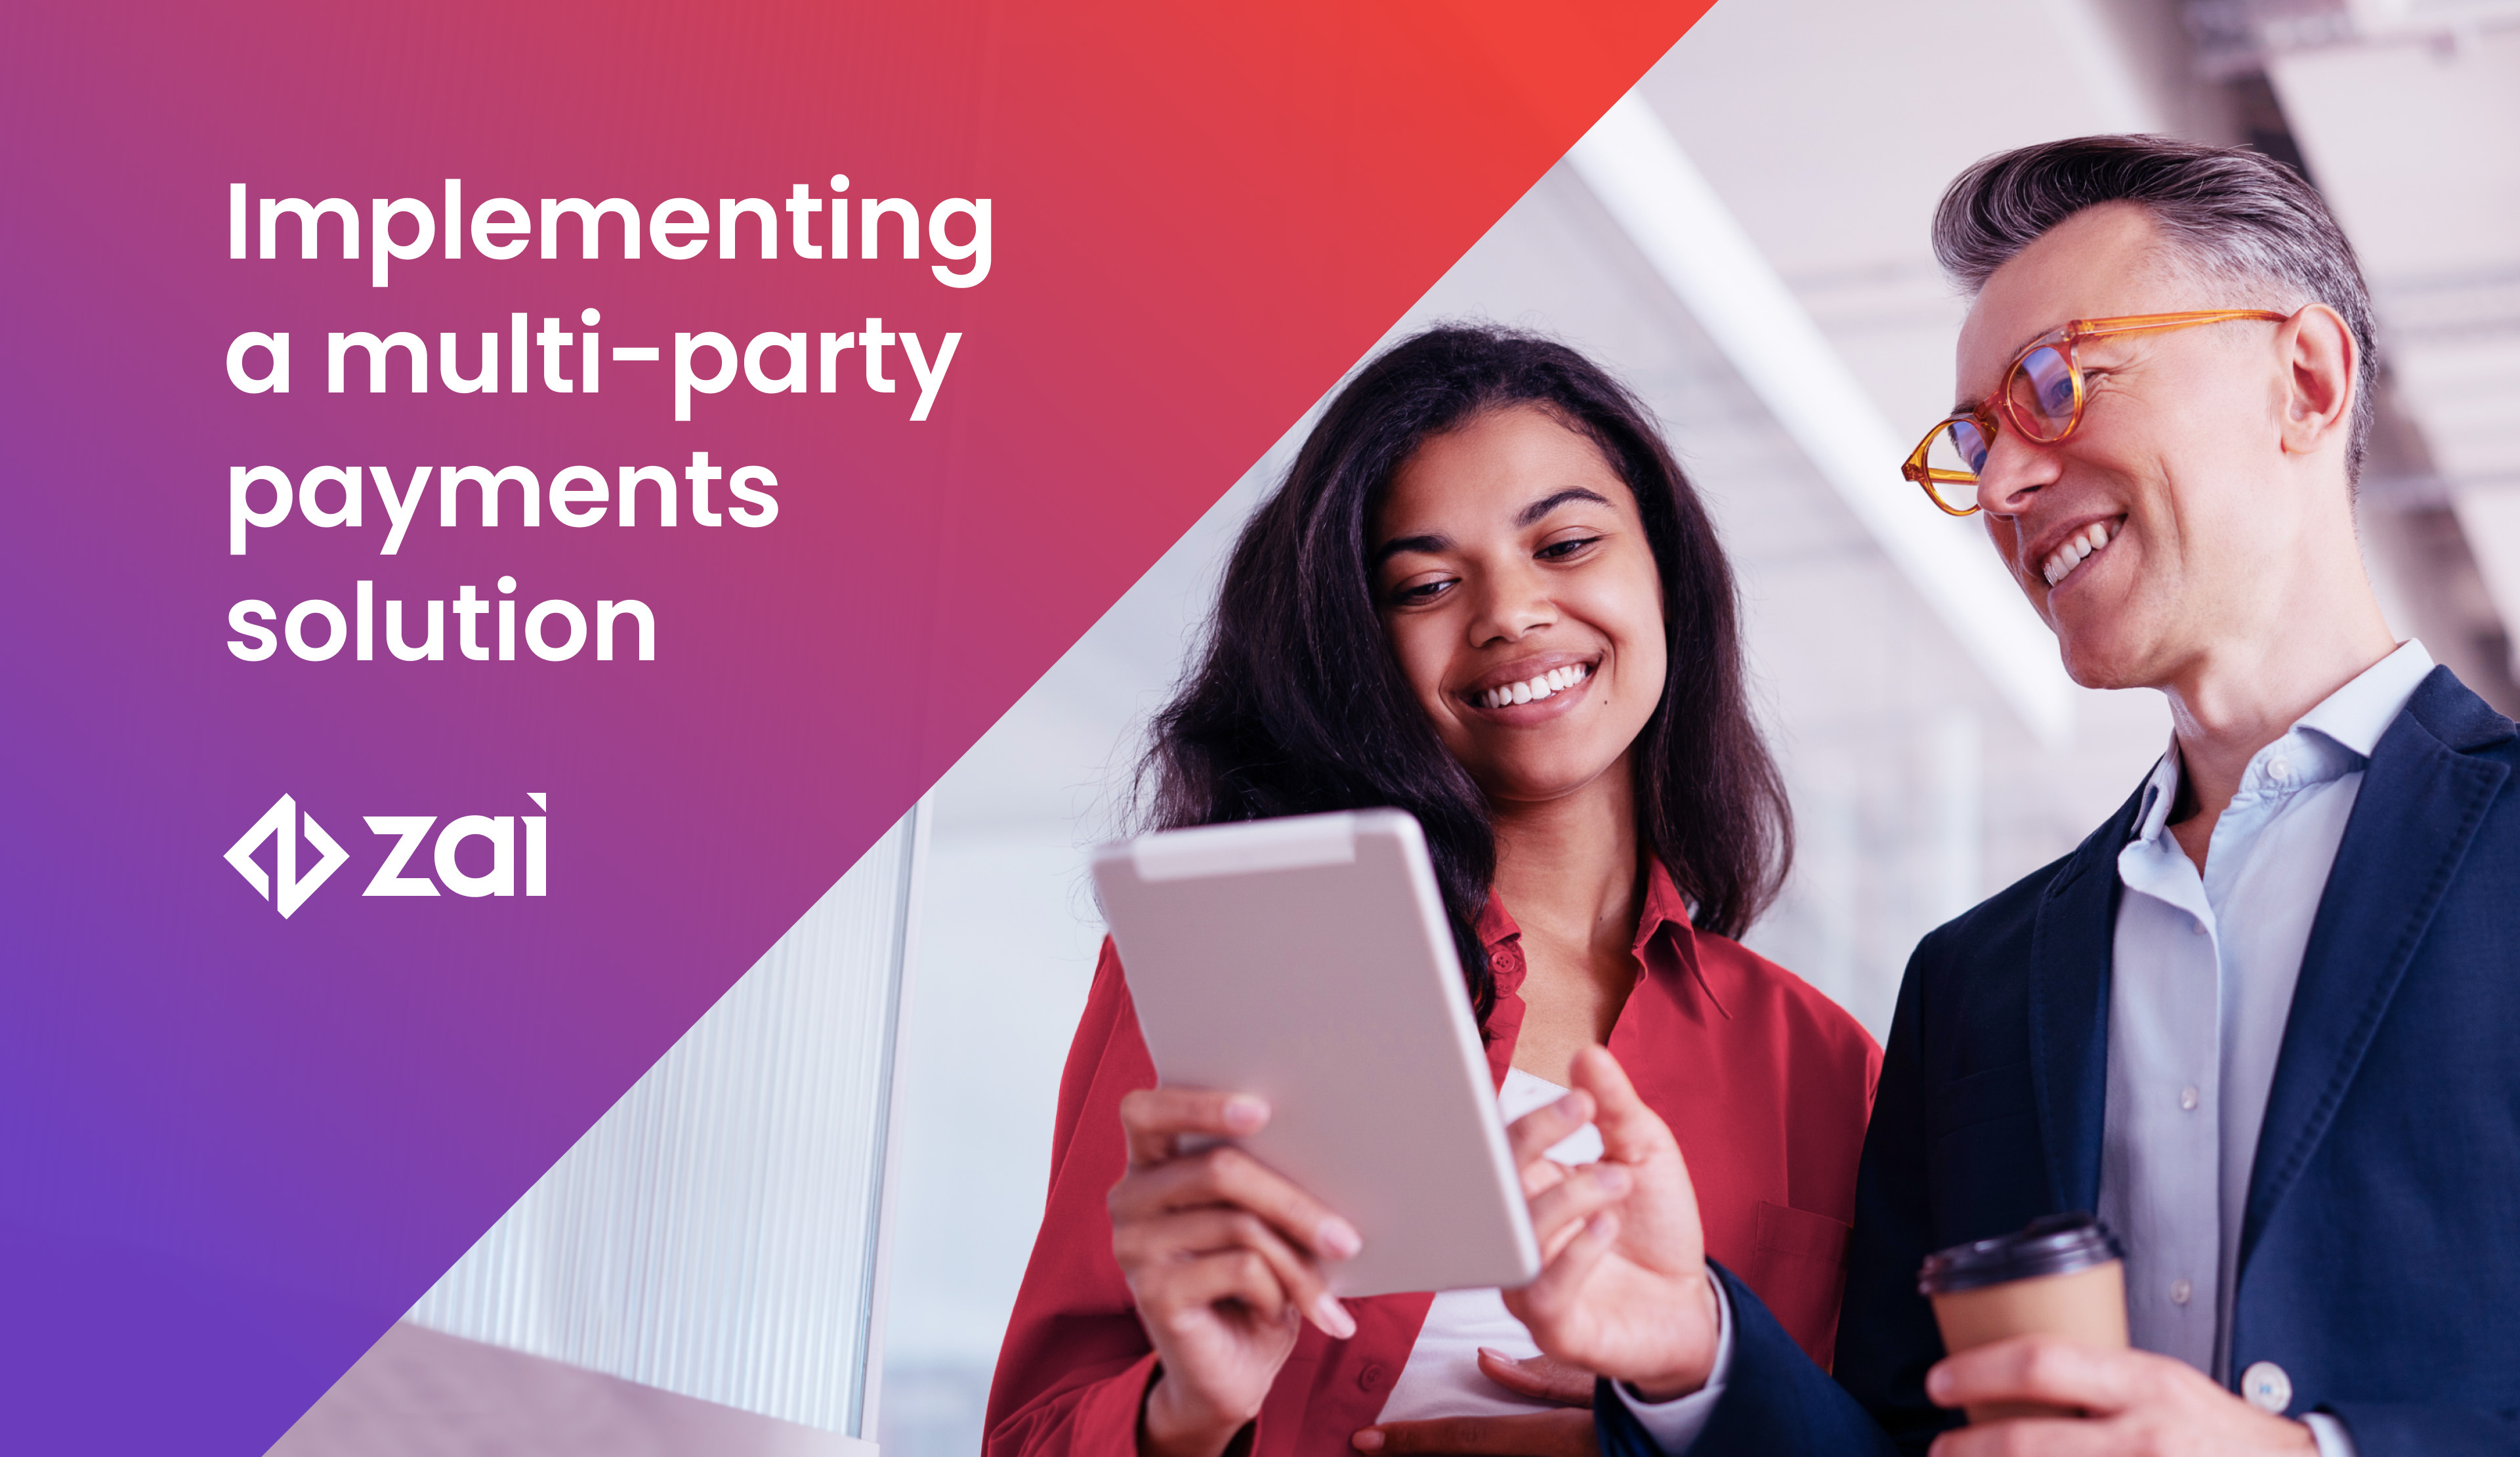 Multi-party payments: How they work and when to implement them